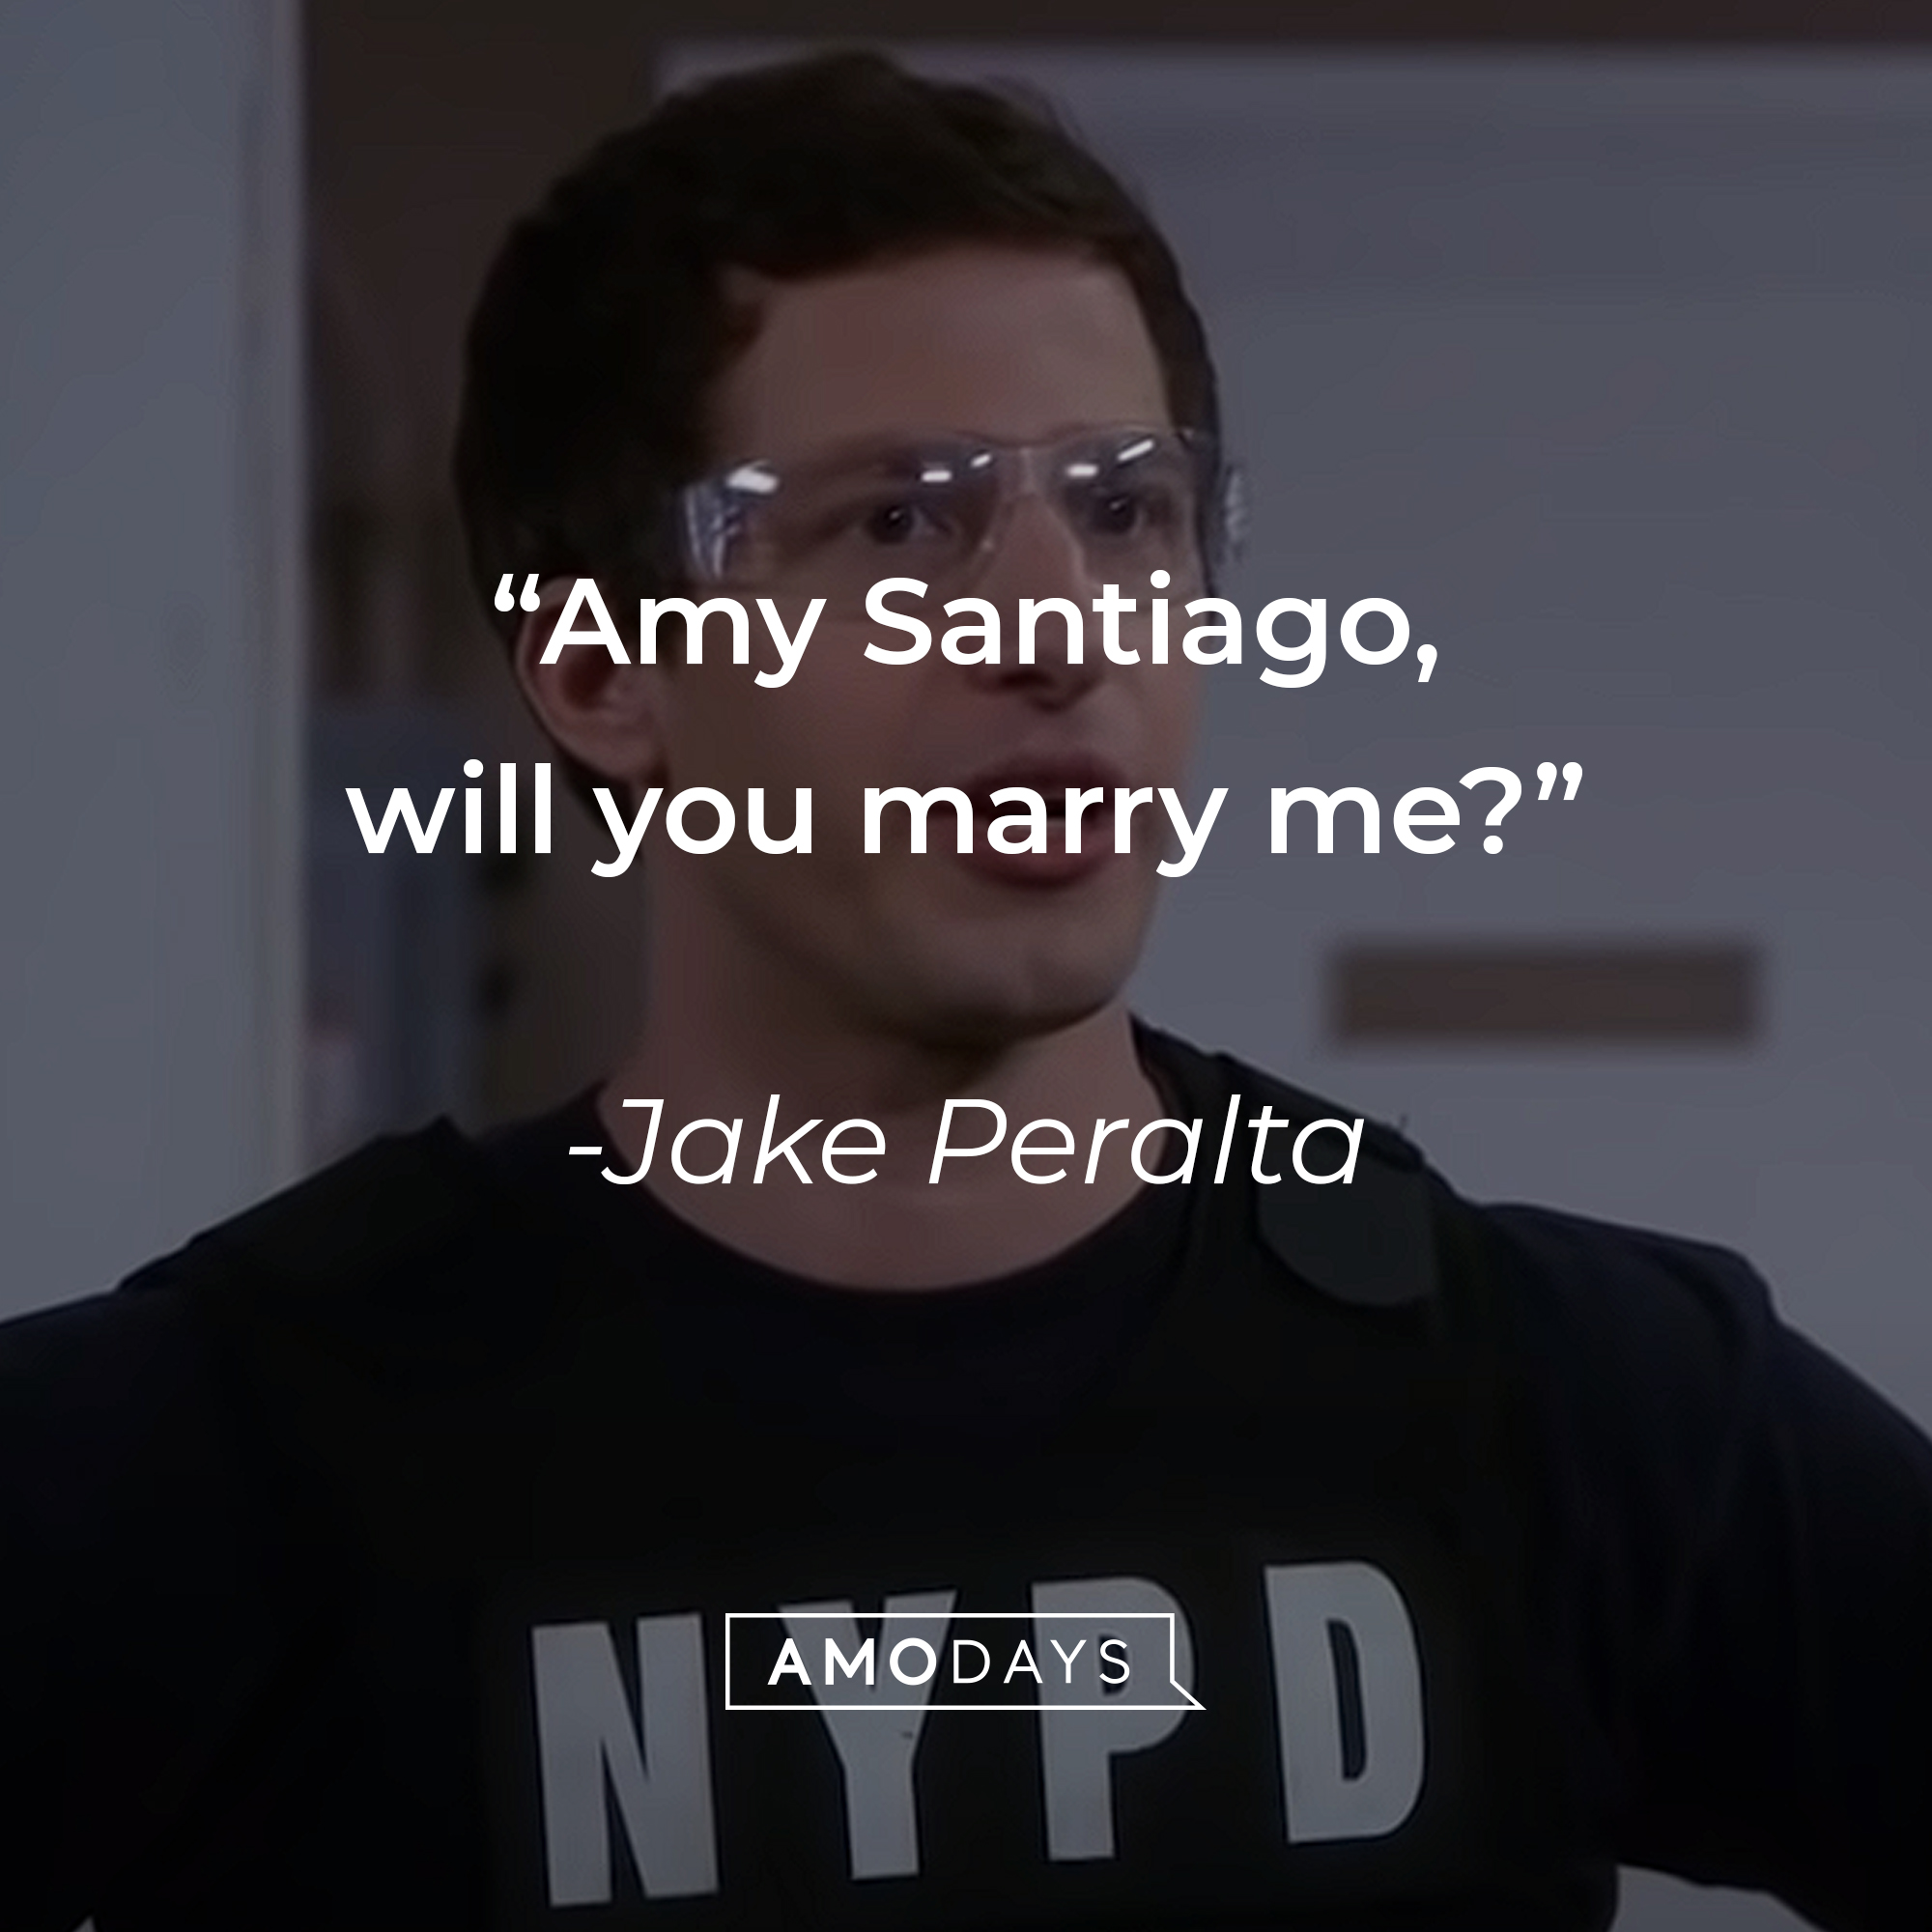 A picture of Jake Peralta with his quote: “Amy Santiago, will you marry me?” |Source: youtube.com/NBCBrooklyn99